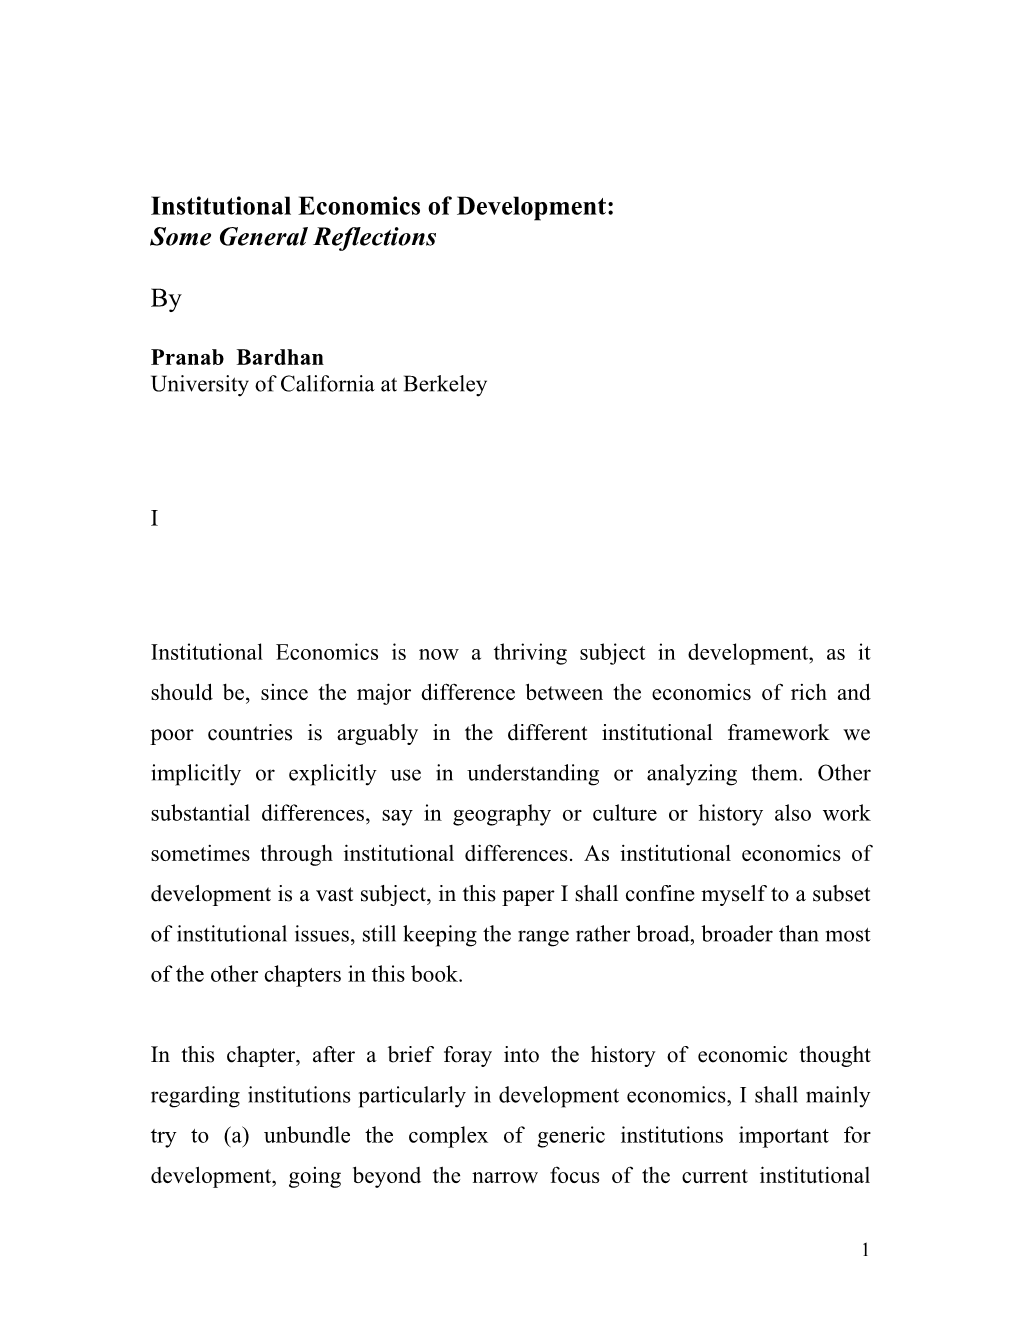 Institutional Economics of Development: Some General Reflections